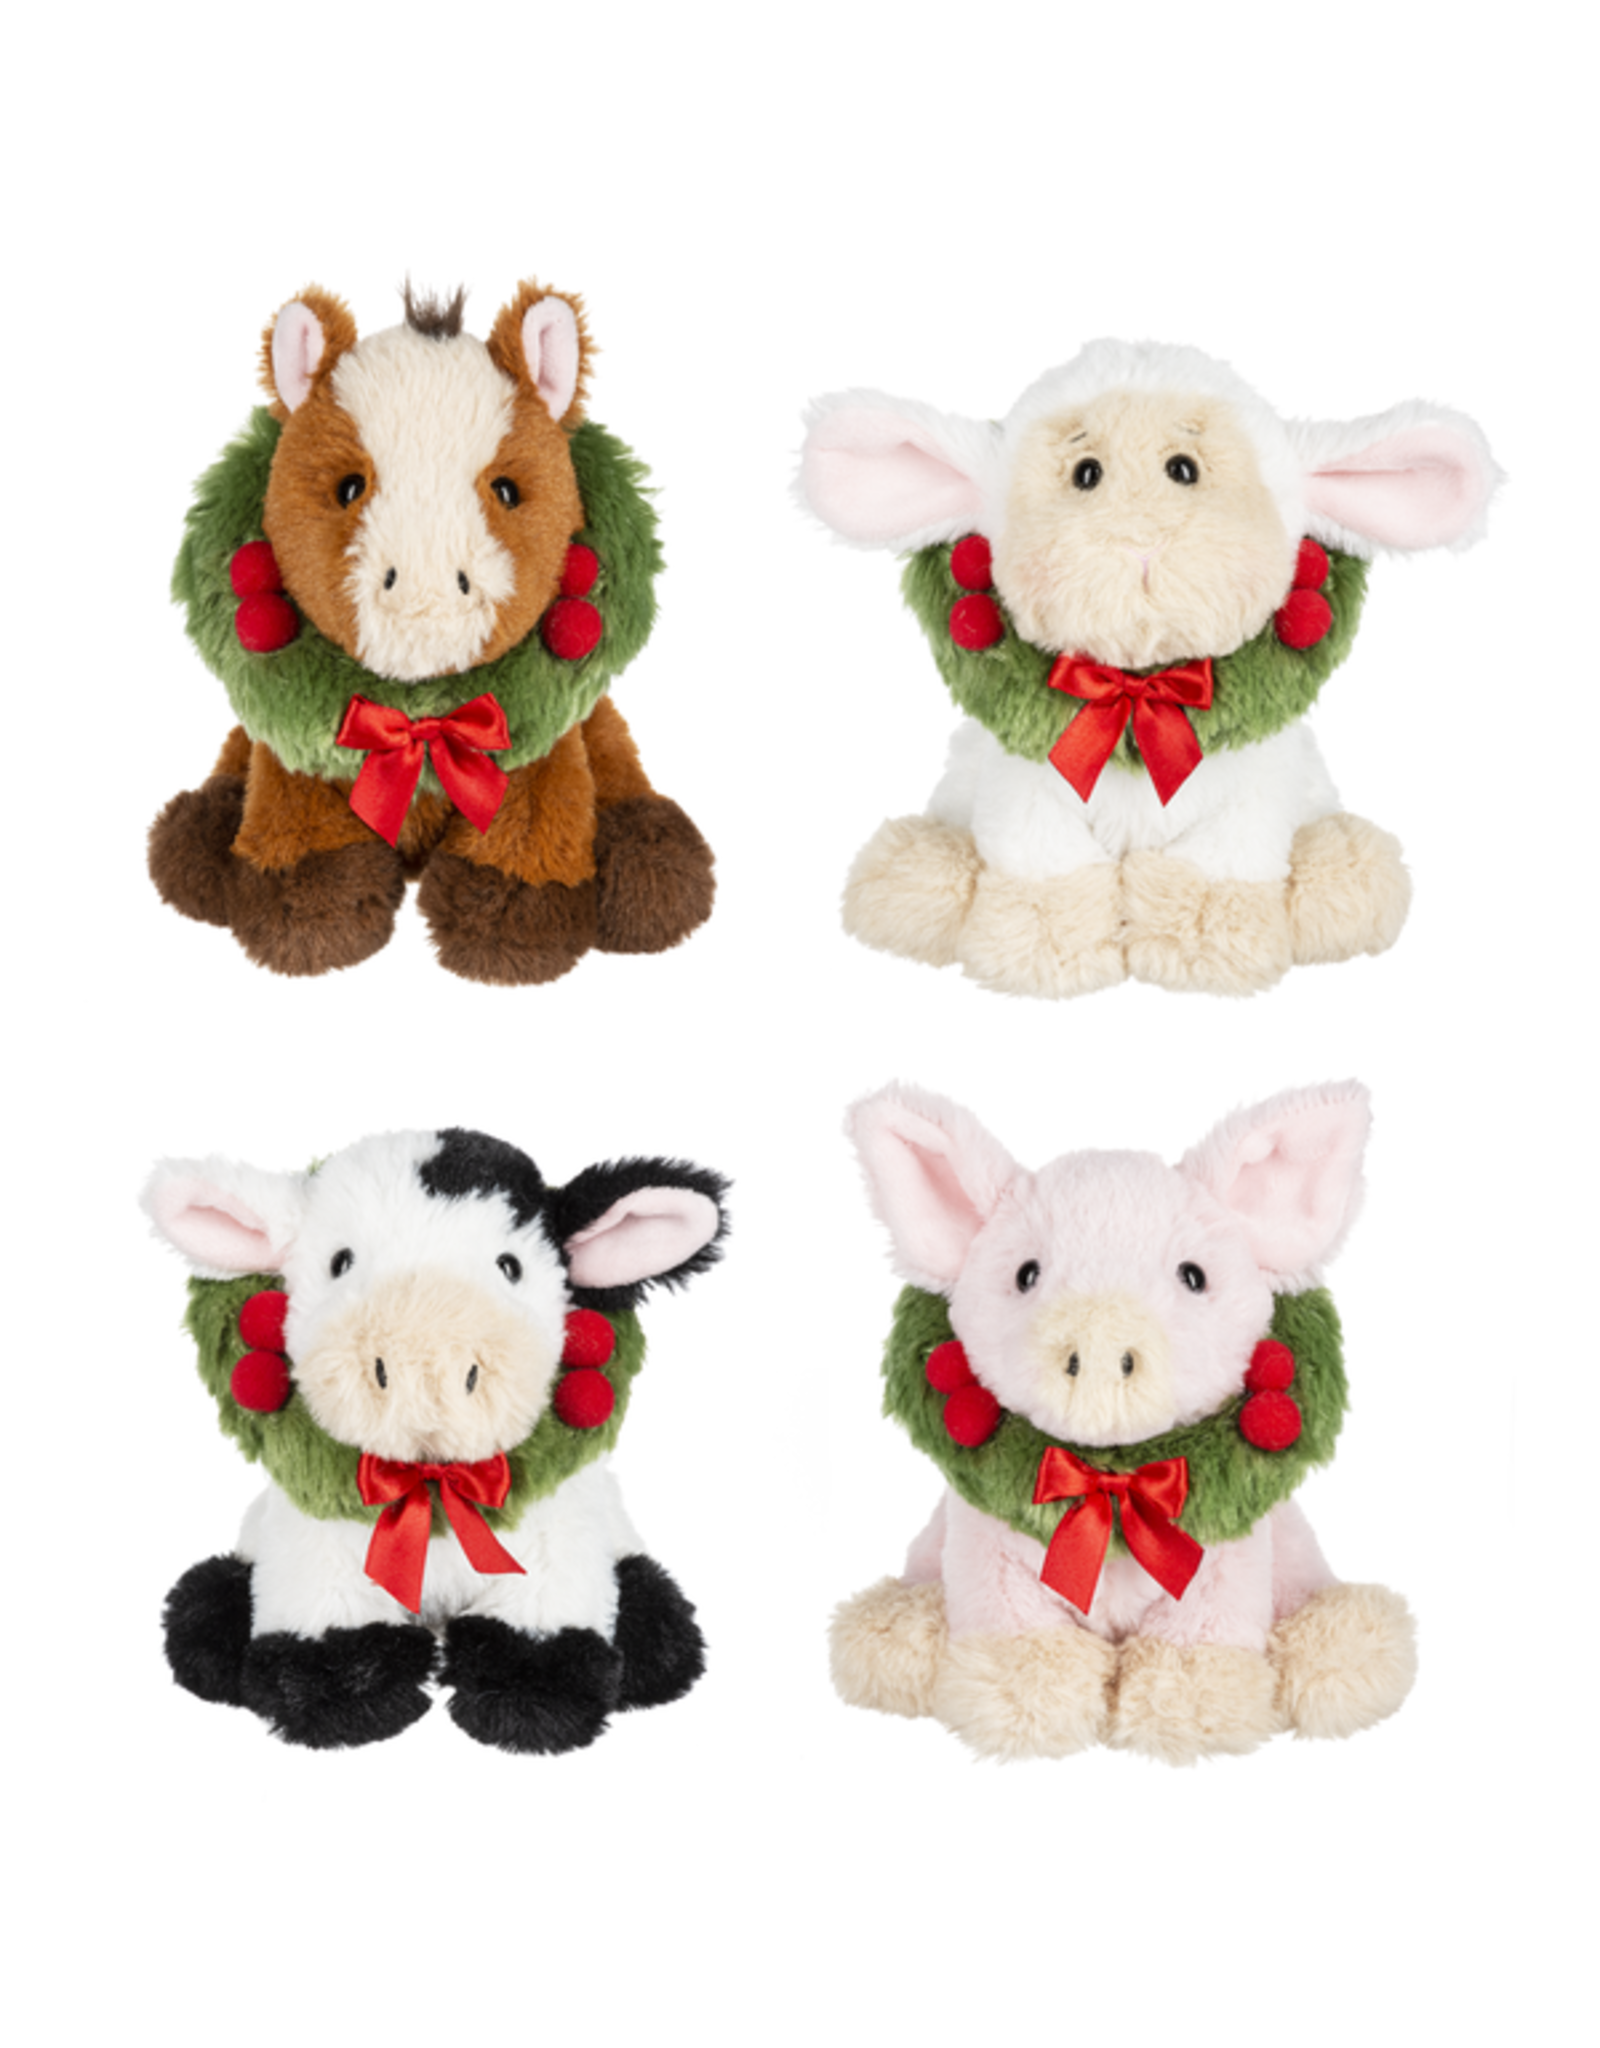 6" Stuffed Animals With Wreaths